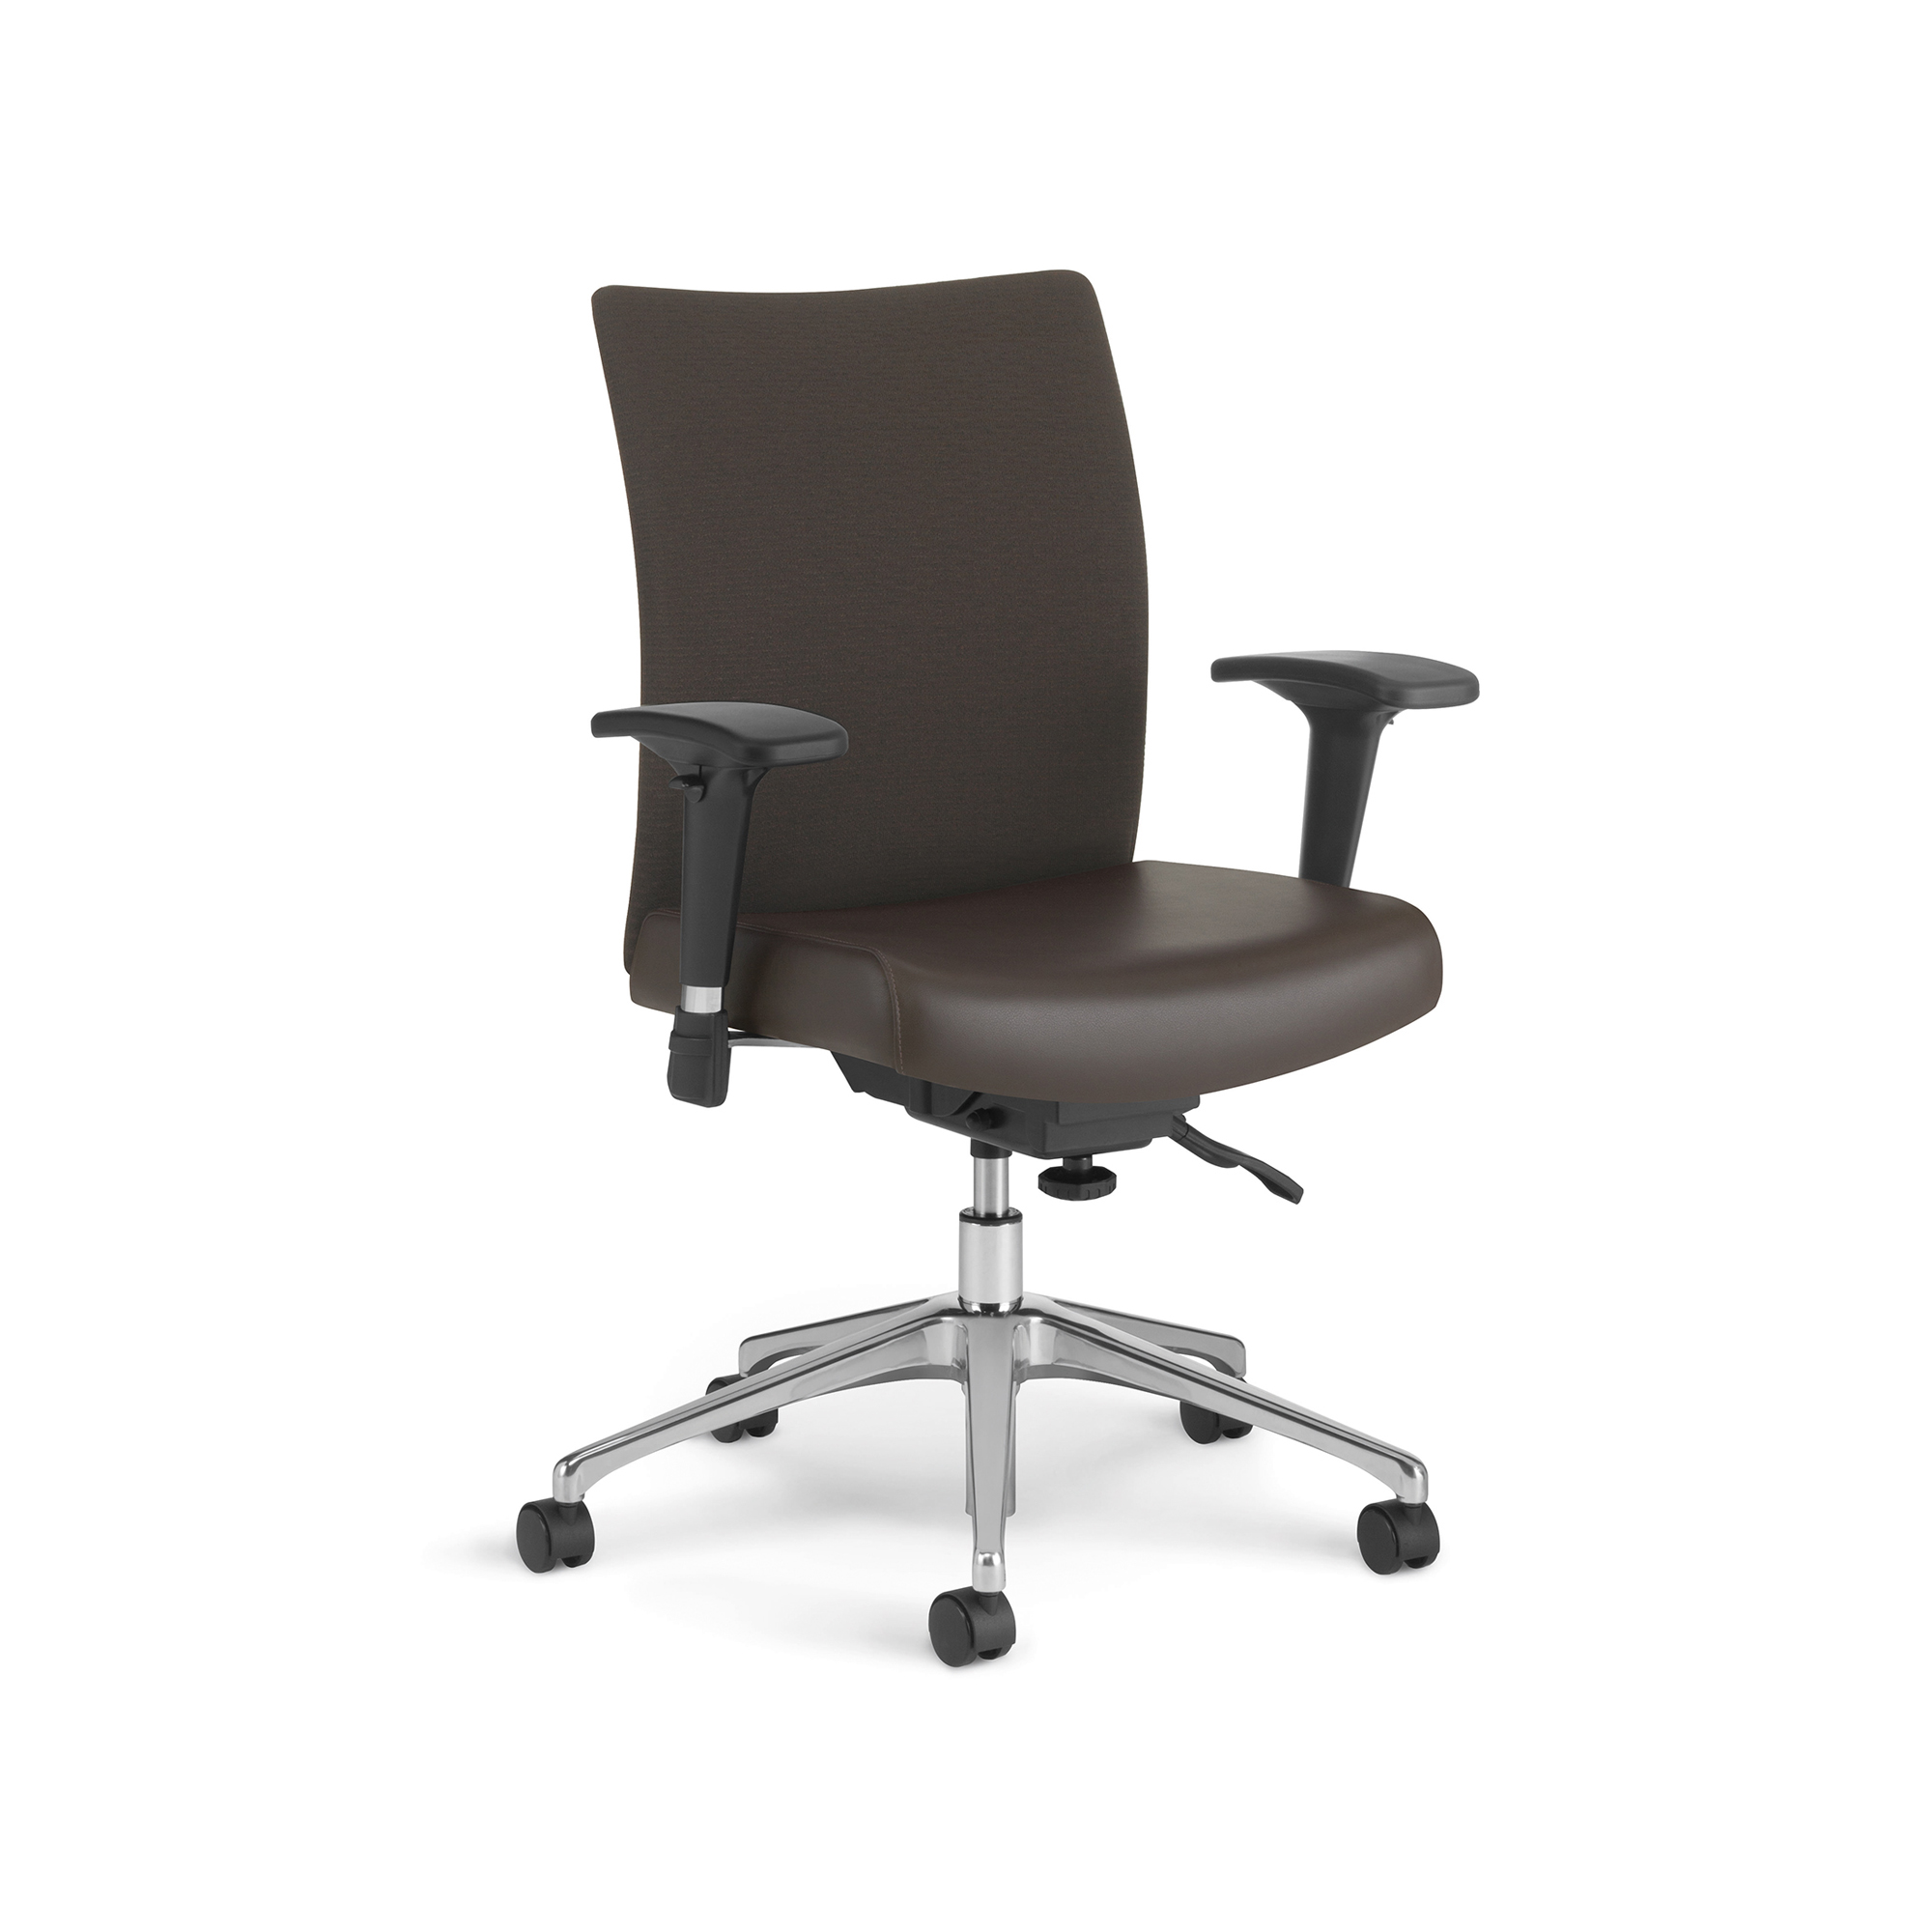 Memento Executive/Conference Chair, Adjustable T-Arm